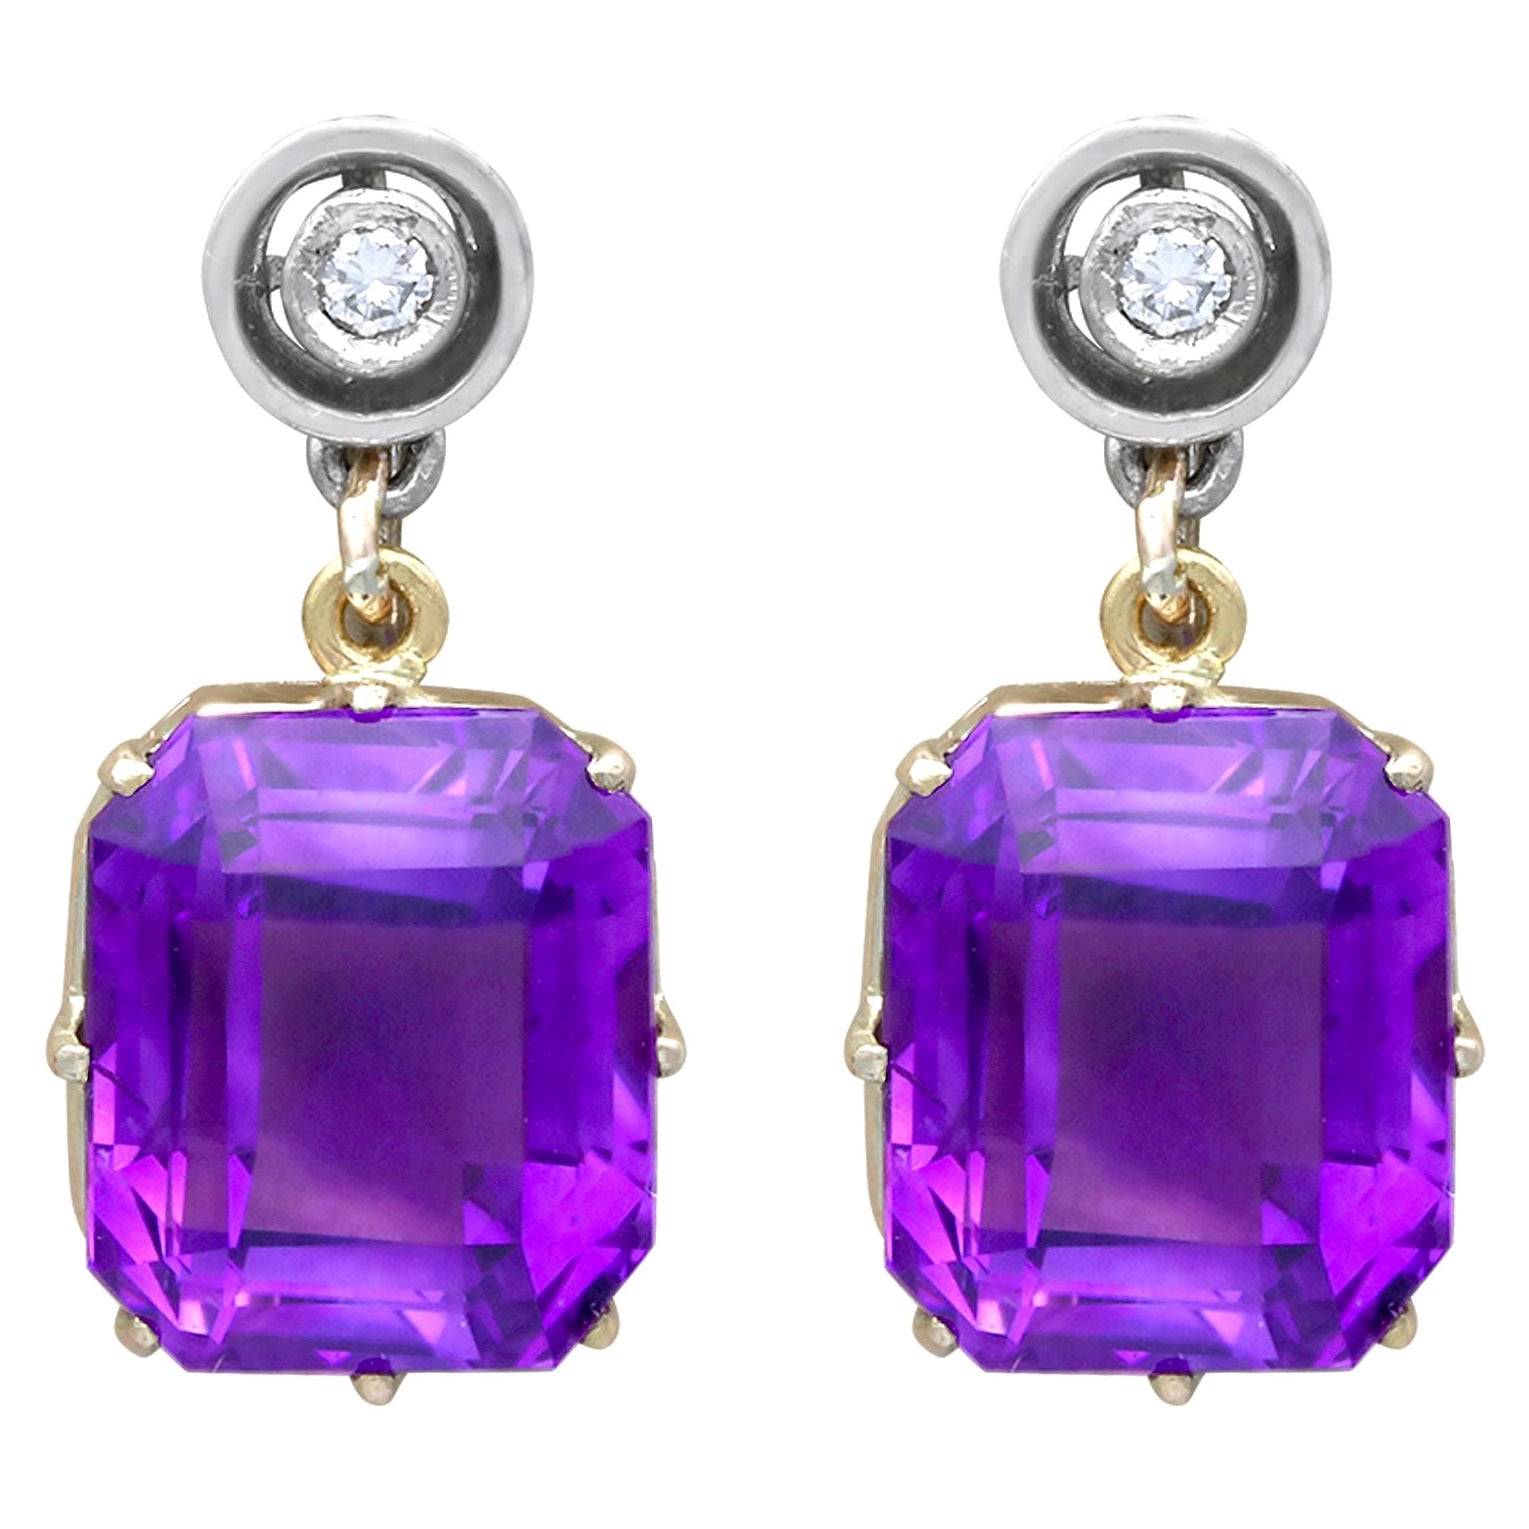 Vintage 13.68Ct Amethyst Diamond and White Gold Drop Earrings Circa 1940